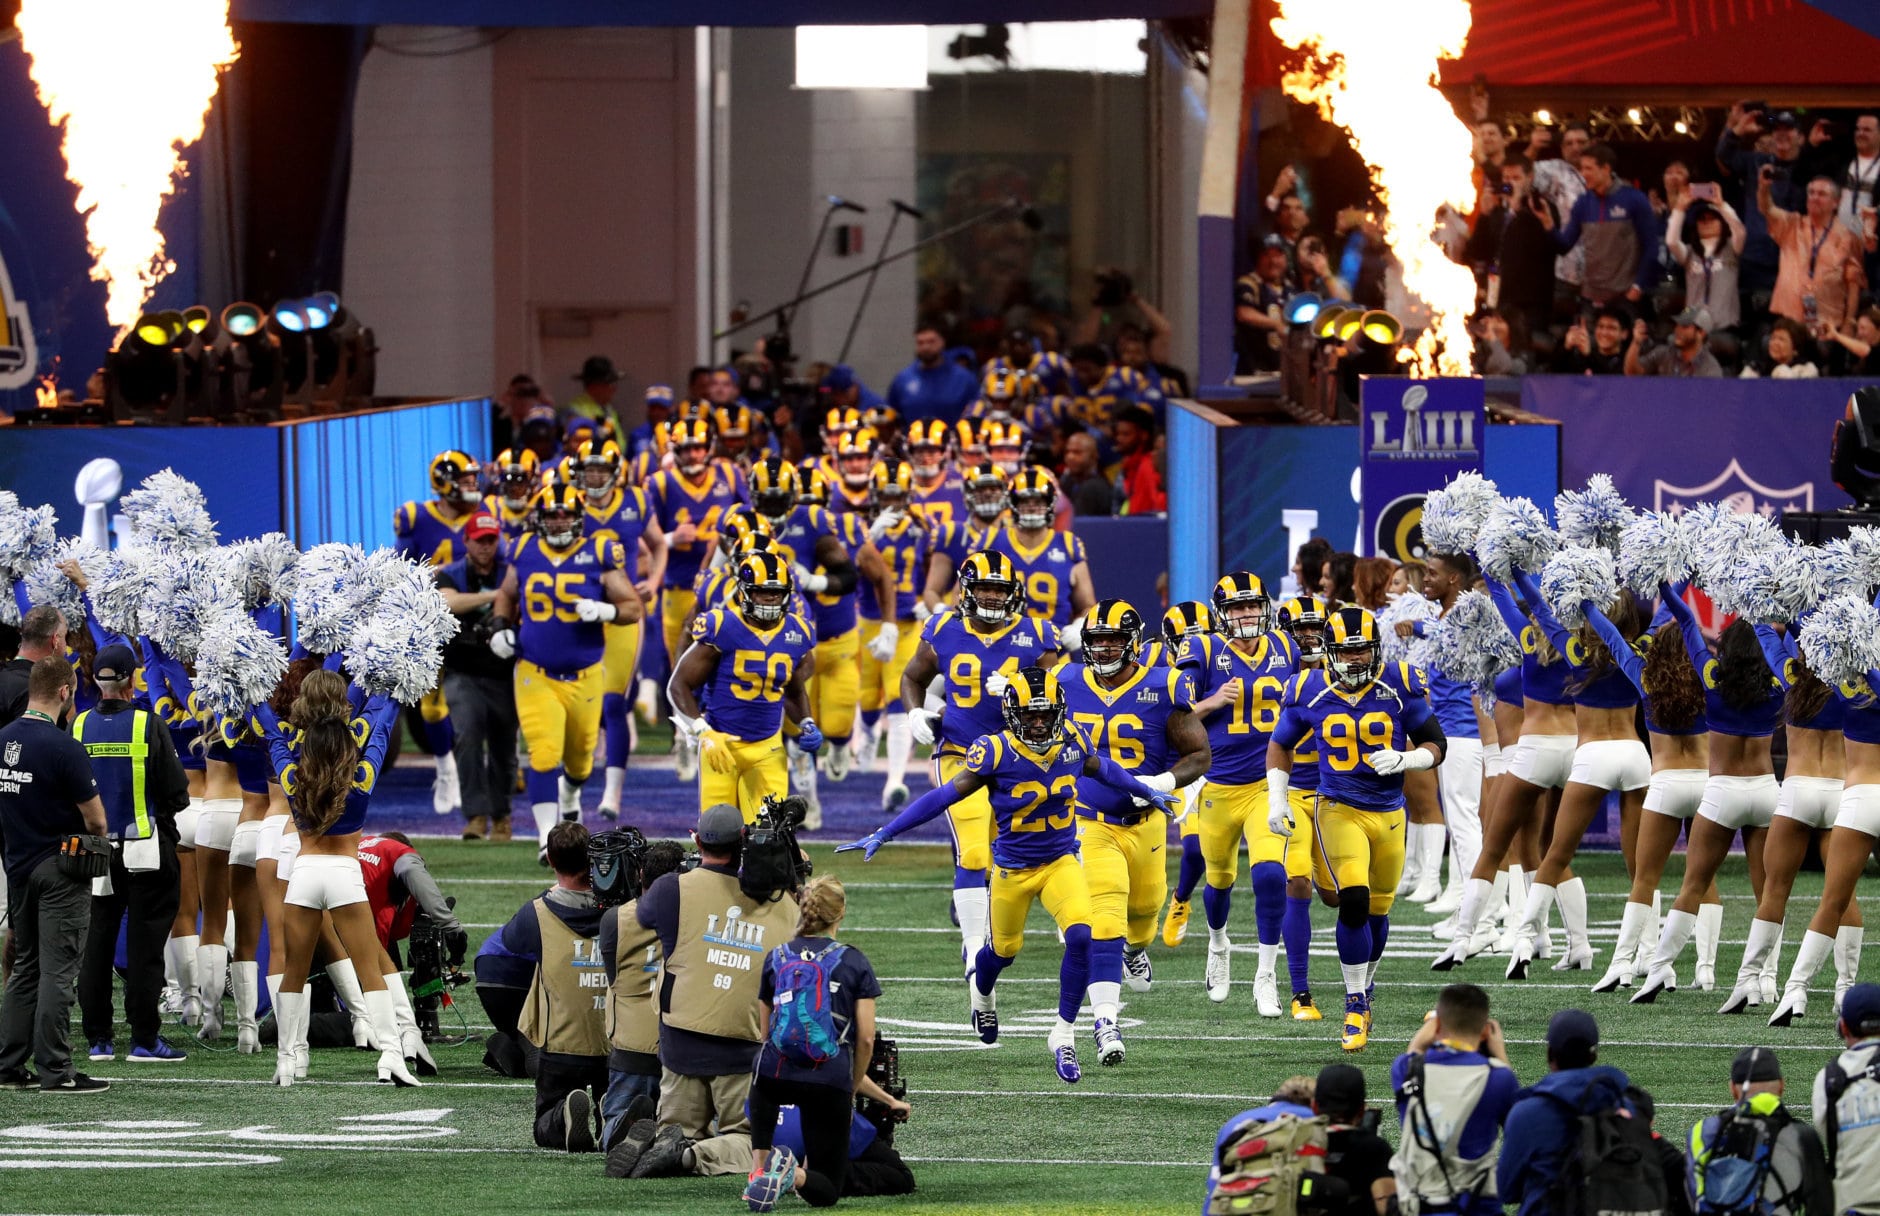 ATLANTA, GEORGIA - FEBRUARY 03:  The Los Angeles Rams take the field prior to Super Bowl LIII against the New England Patriots at Mercedes-Benz Stadium on February 03, 2019 in Atlanta, Georgia. (Photo by Patrick Smith/Getty Images)